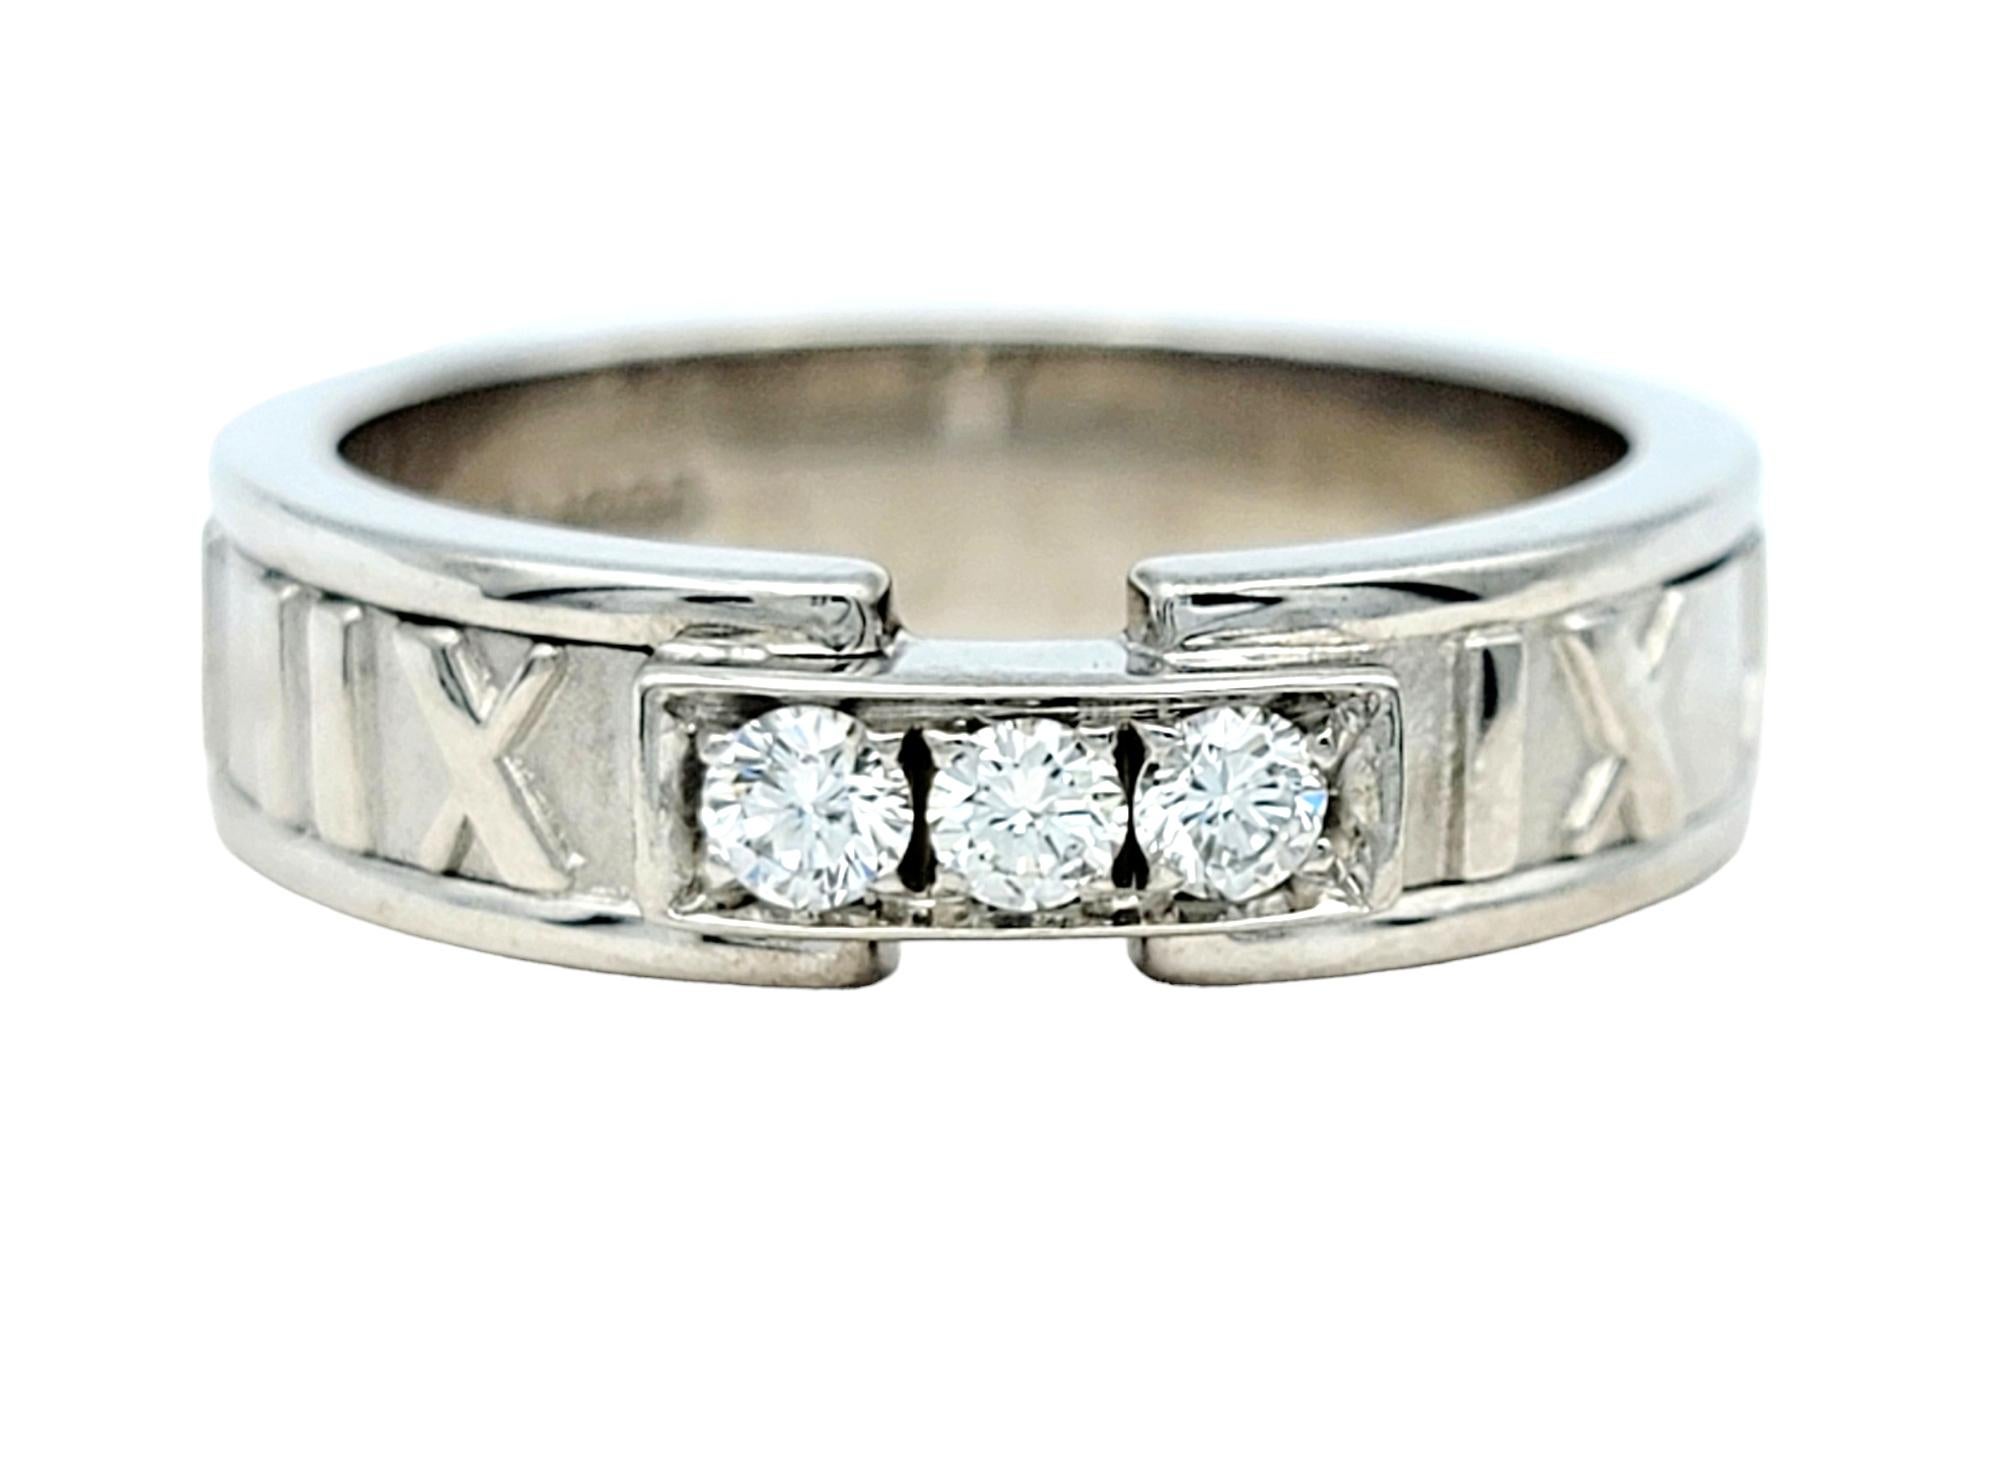 Ring Size: 7.75

This gorgeous Tiffany & Co. Atlas band ring exudes elegance and sophistication, designed with the iconic Atlas motif that symbolizes strength and timeless beauty. Crafted from lustrous 18 karat white gold, this exquisite ring